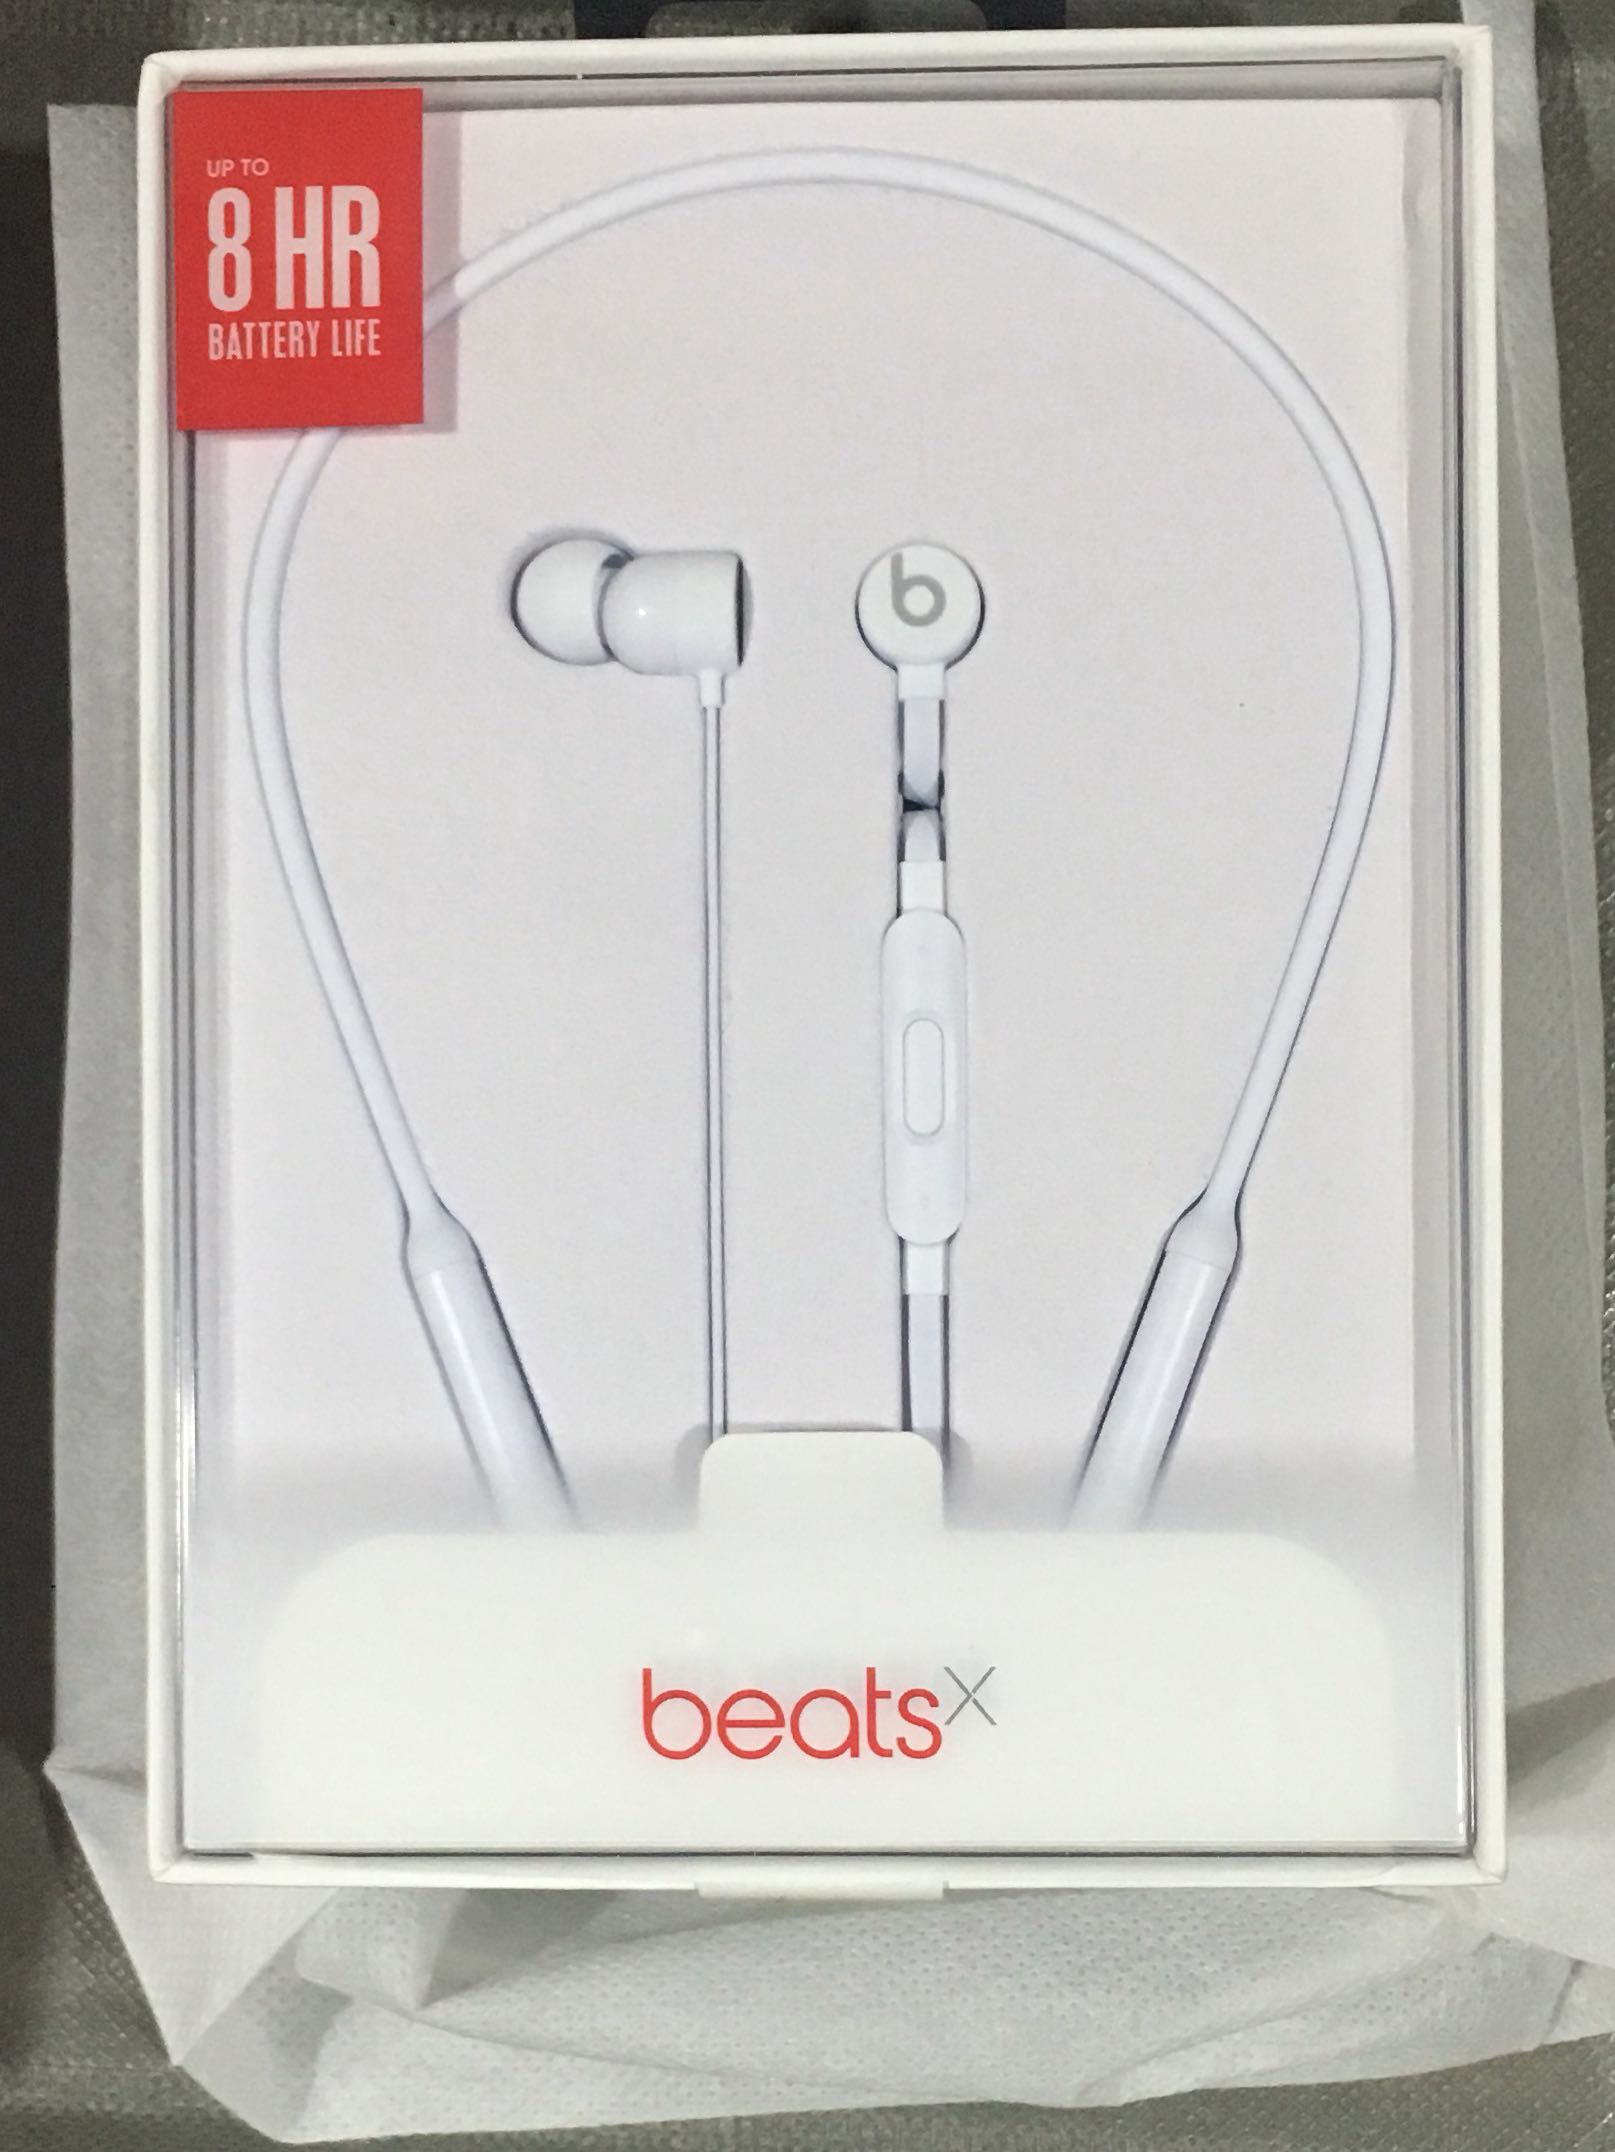 beats x in the box